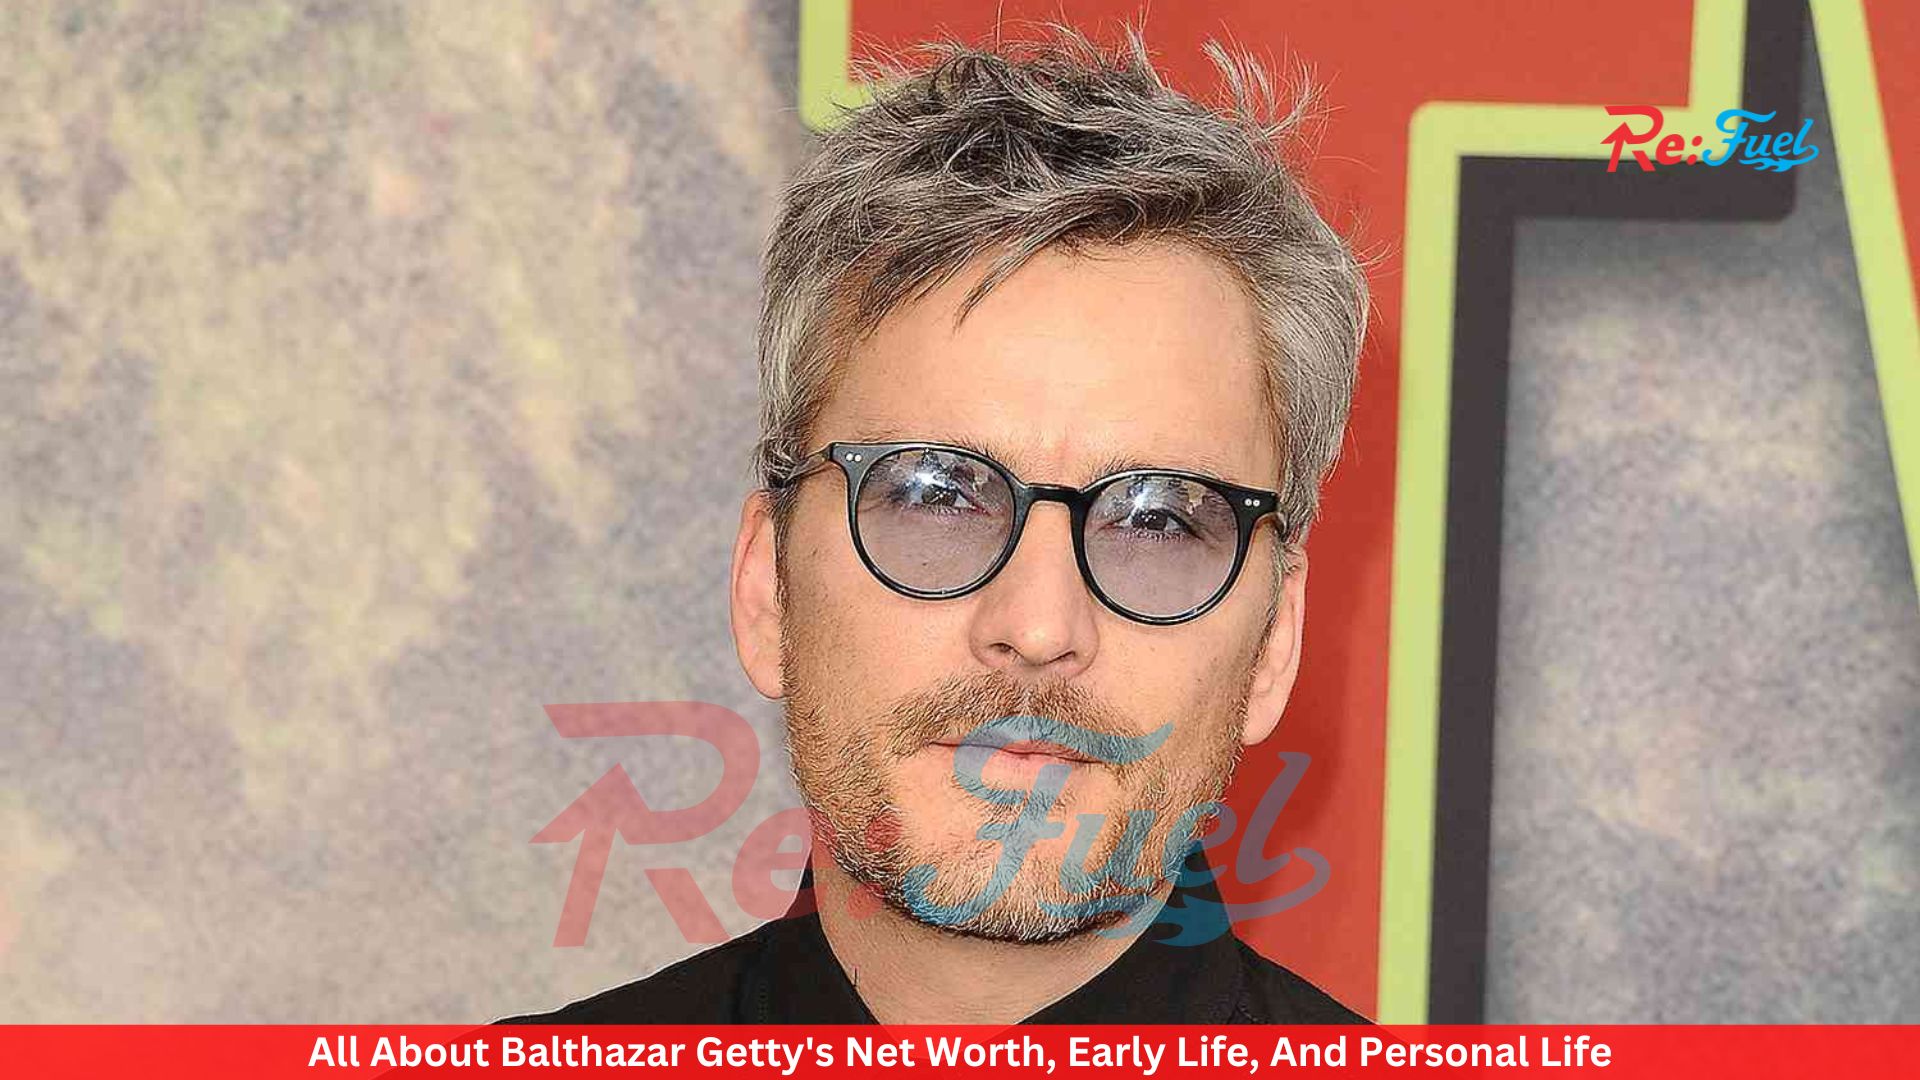 All About Balthazar Getty's Net Worth, Early Life, And Personal Life